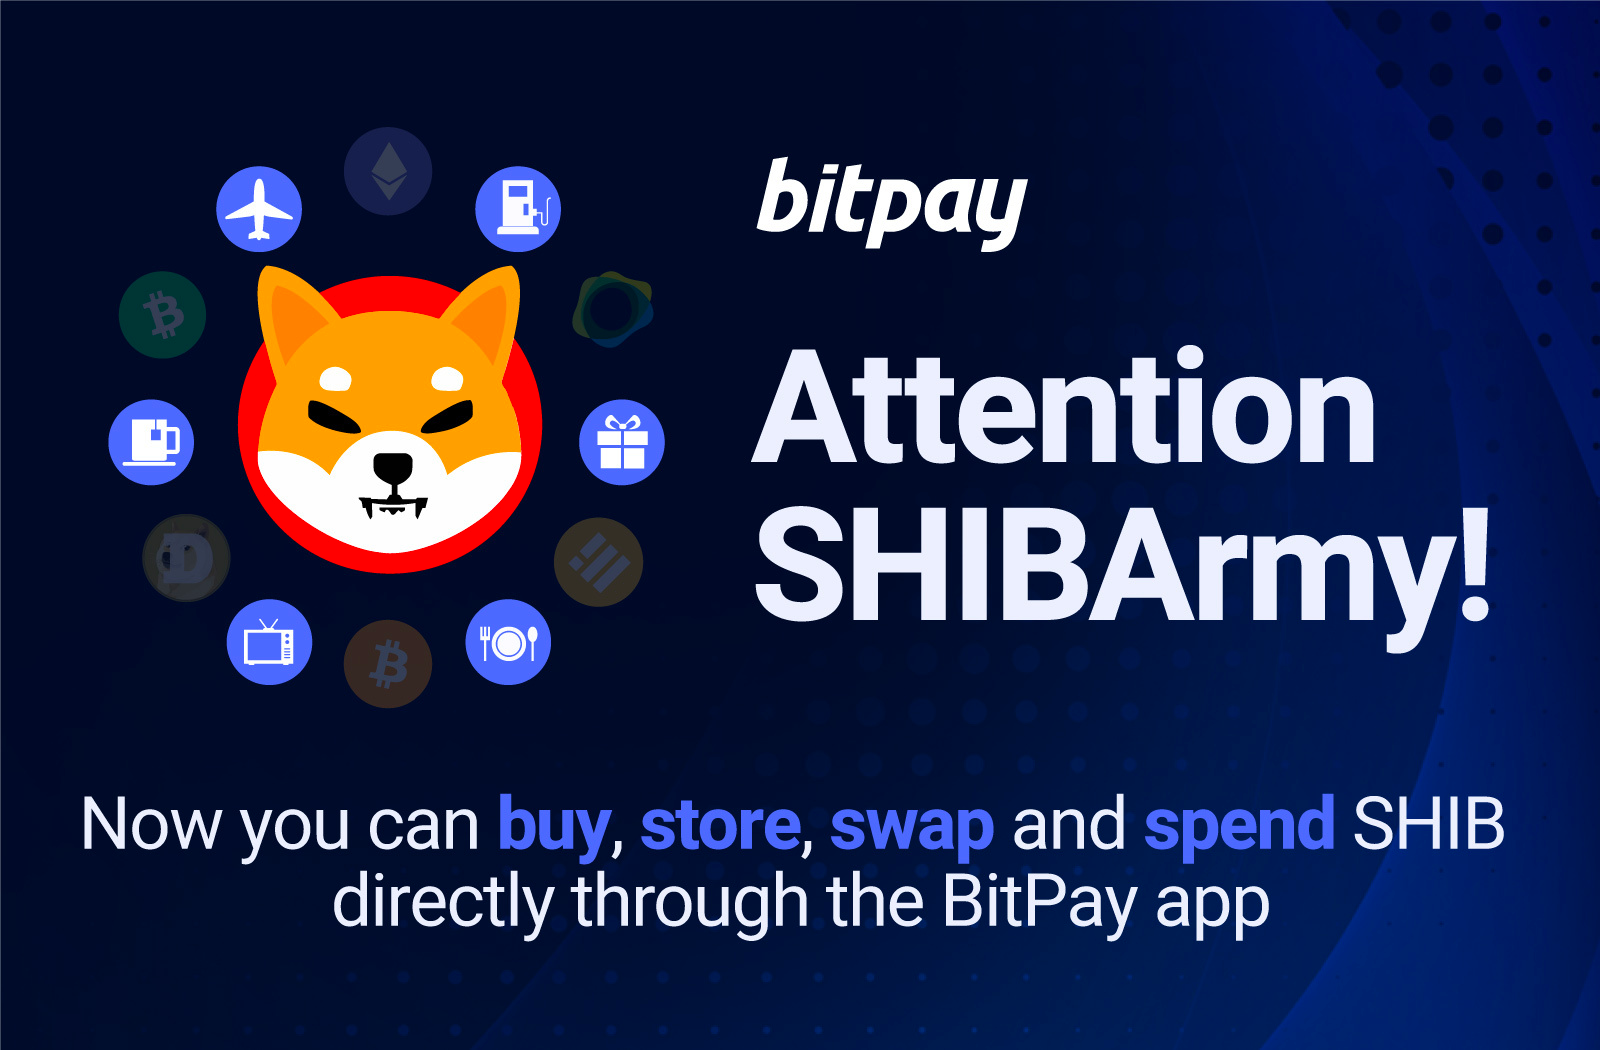 Now you can buy, store, swap and spend SHIB directly through the BitPay app.